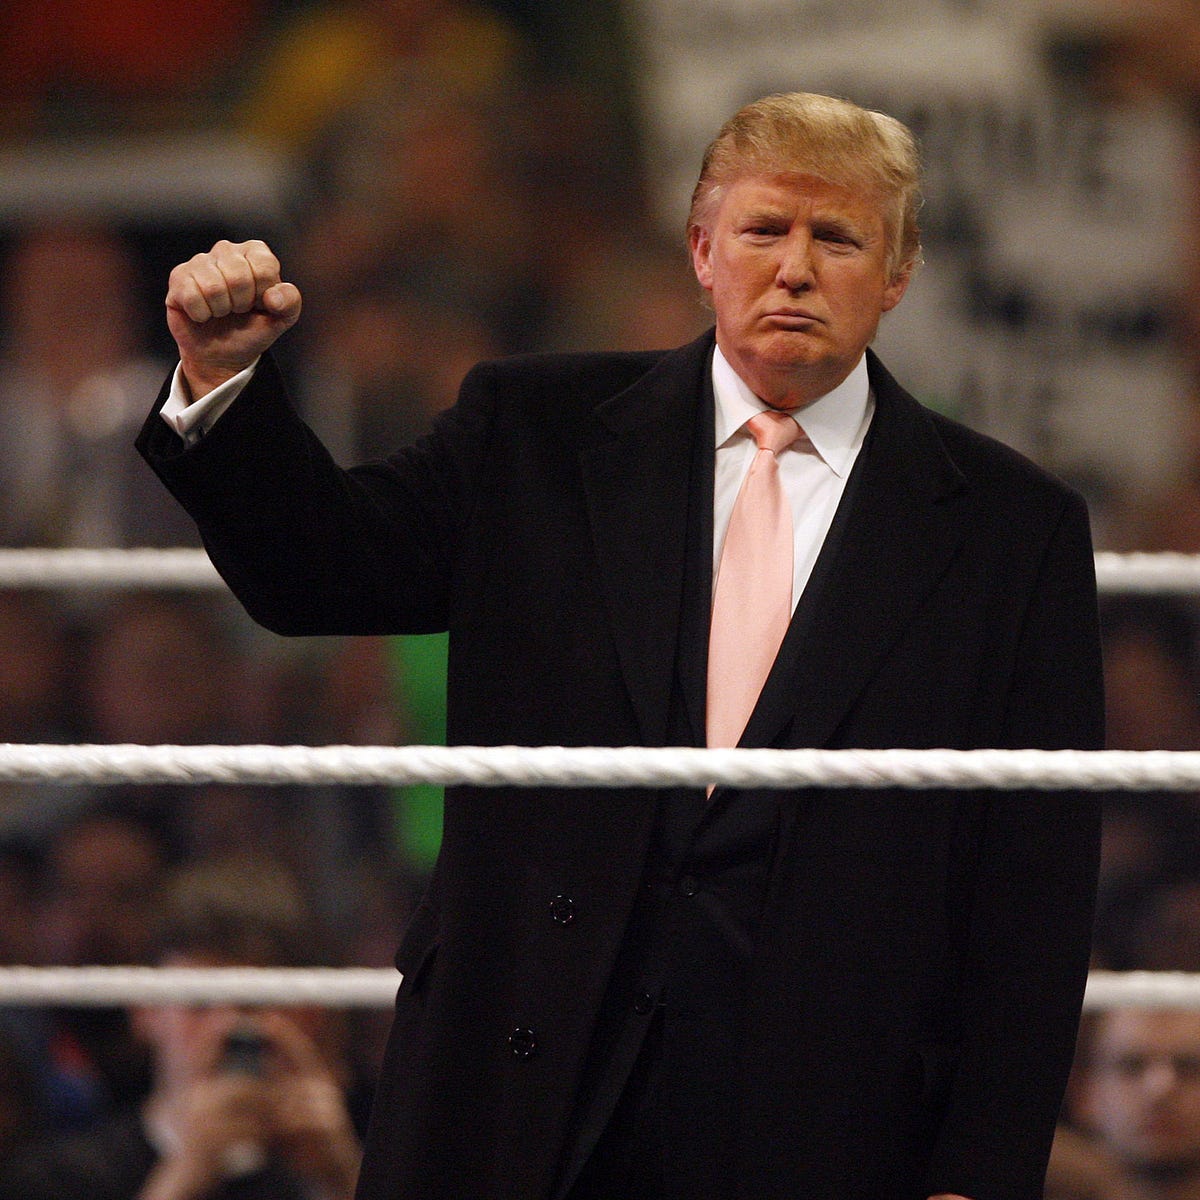 Just Like Wrestlemania, Trump Puts on a Show, by Henry Wismayer